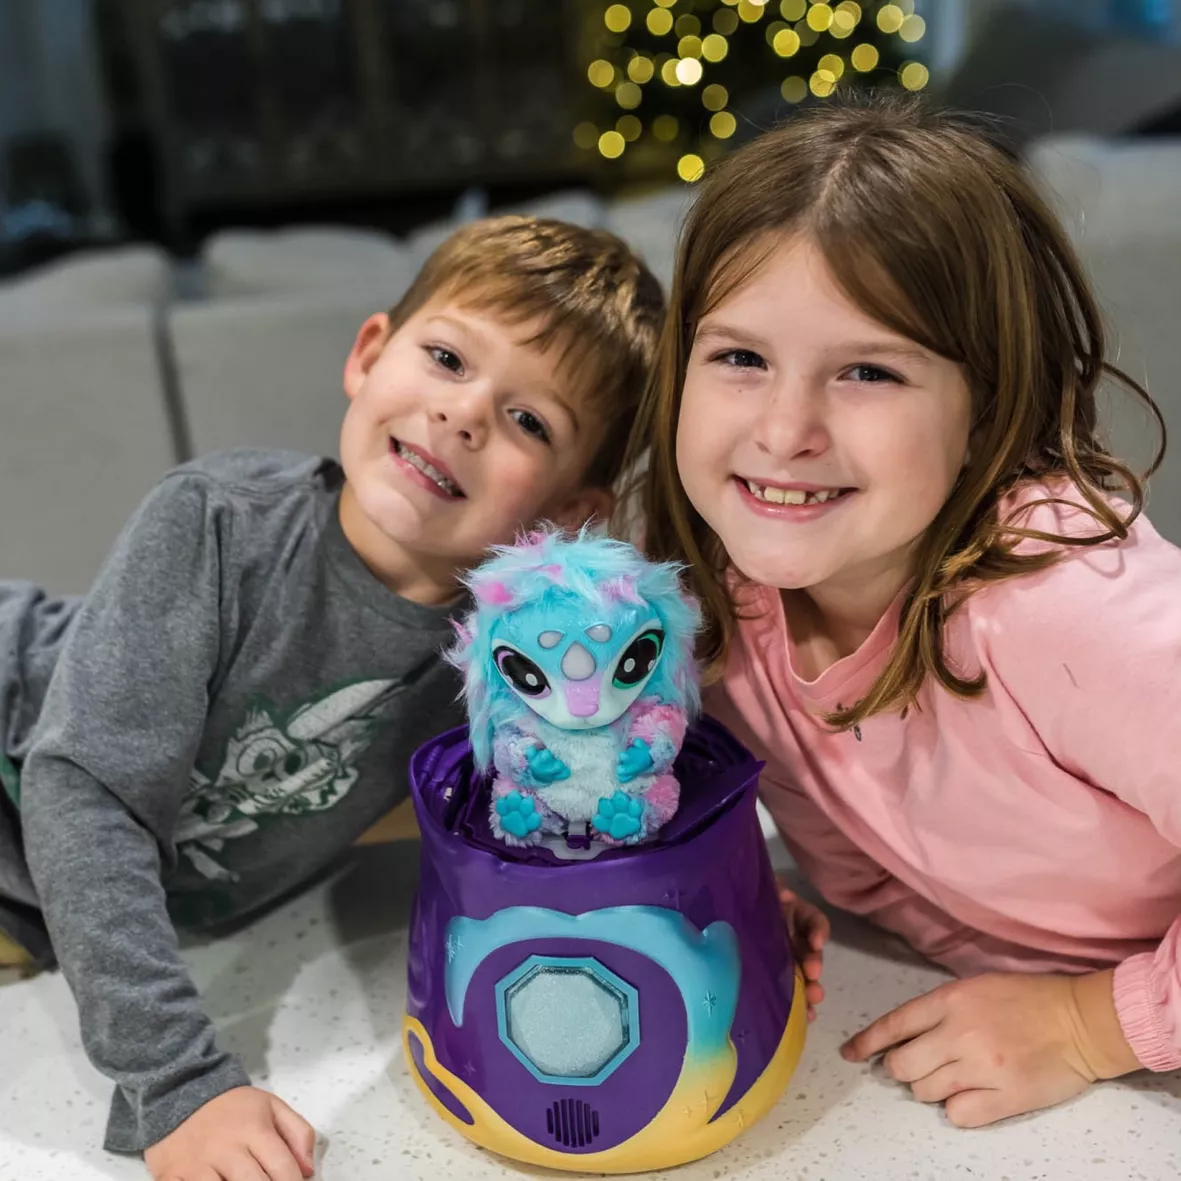 Magic Mixies Magical Misting Crystal Ball review: A truly magical toy